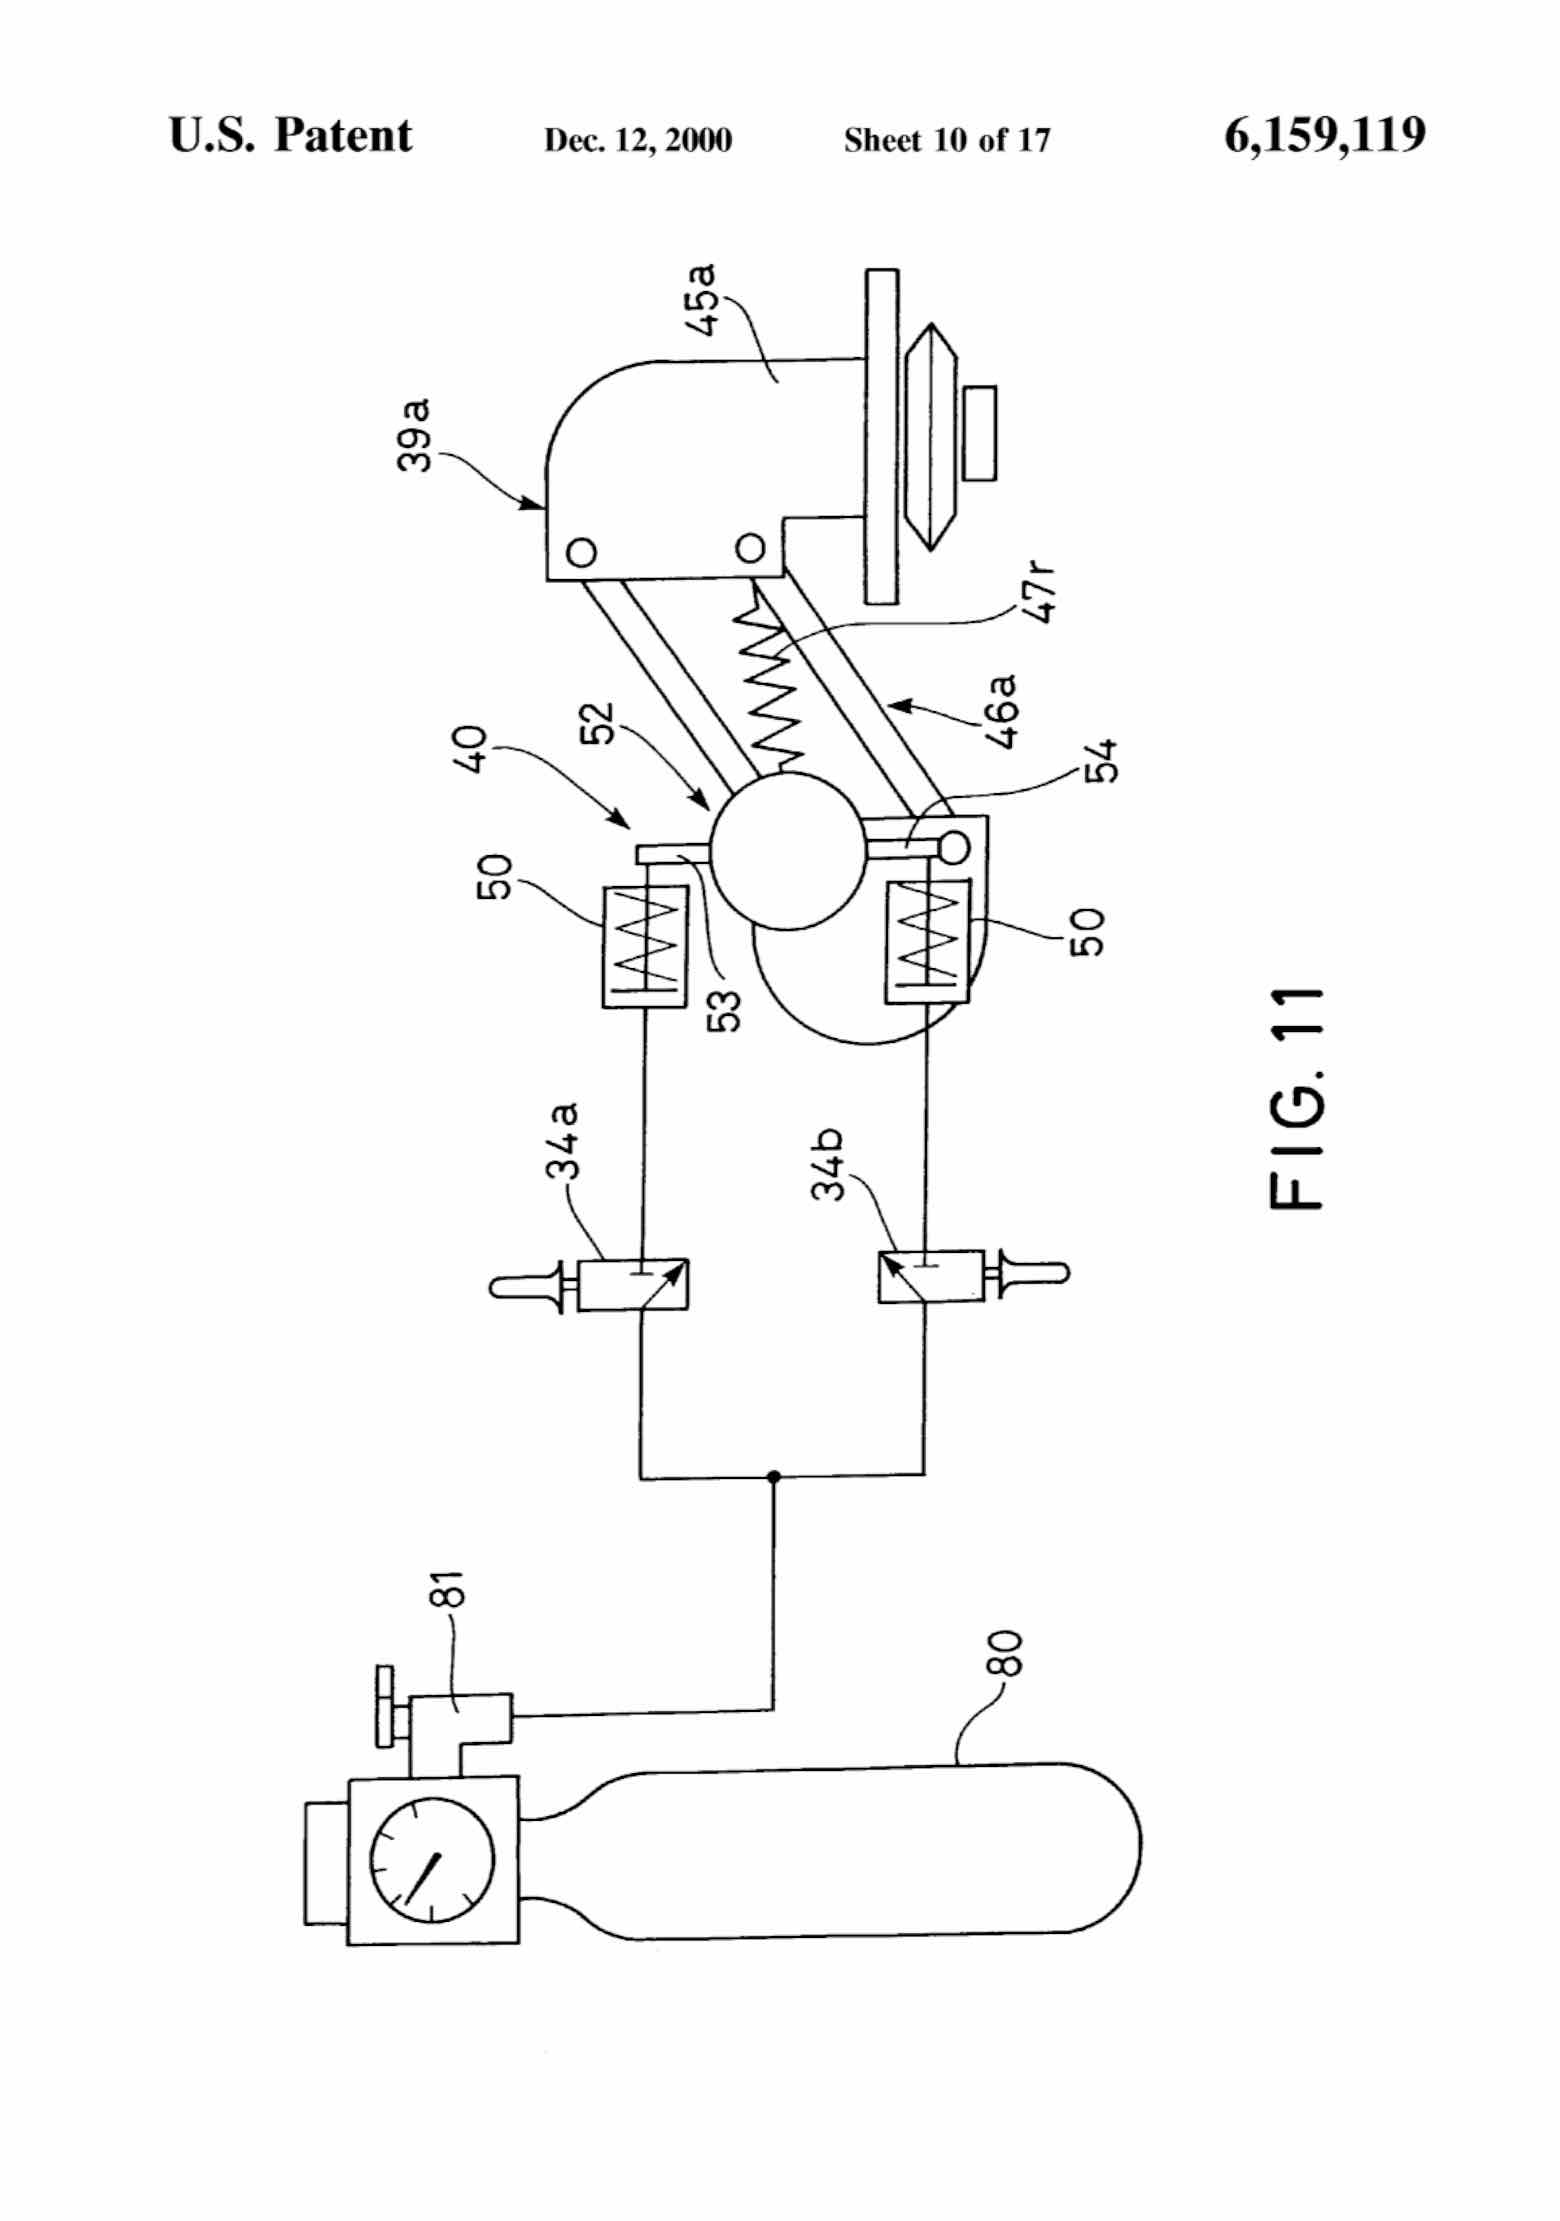 US Patent 6,159,119 - Shimano AirLines scan 11 main image